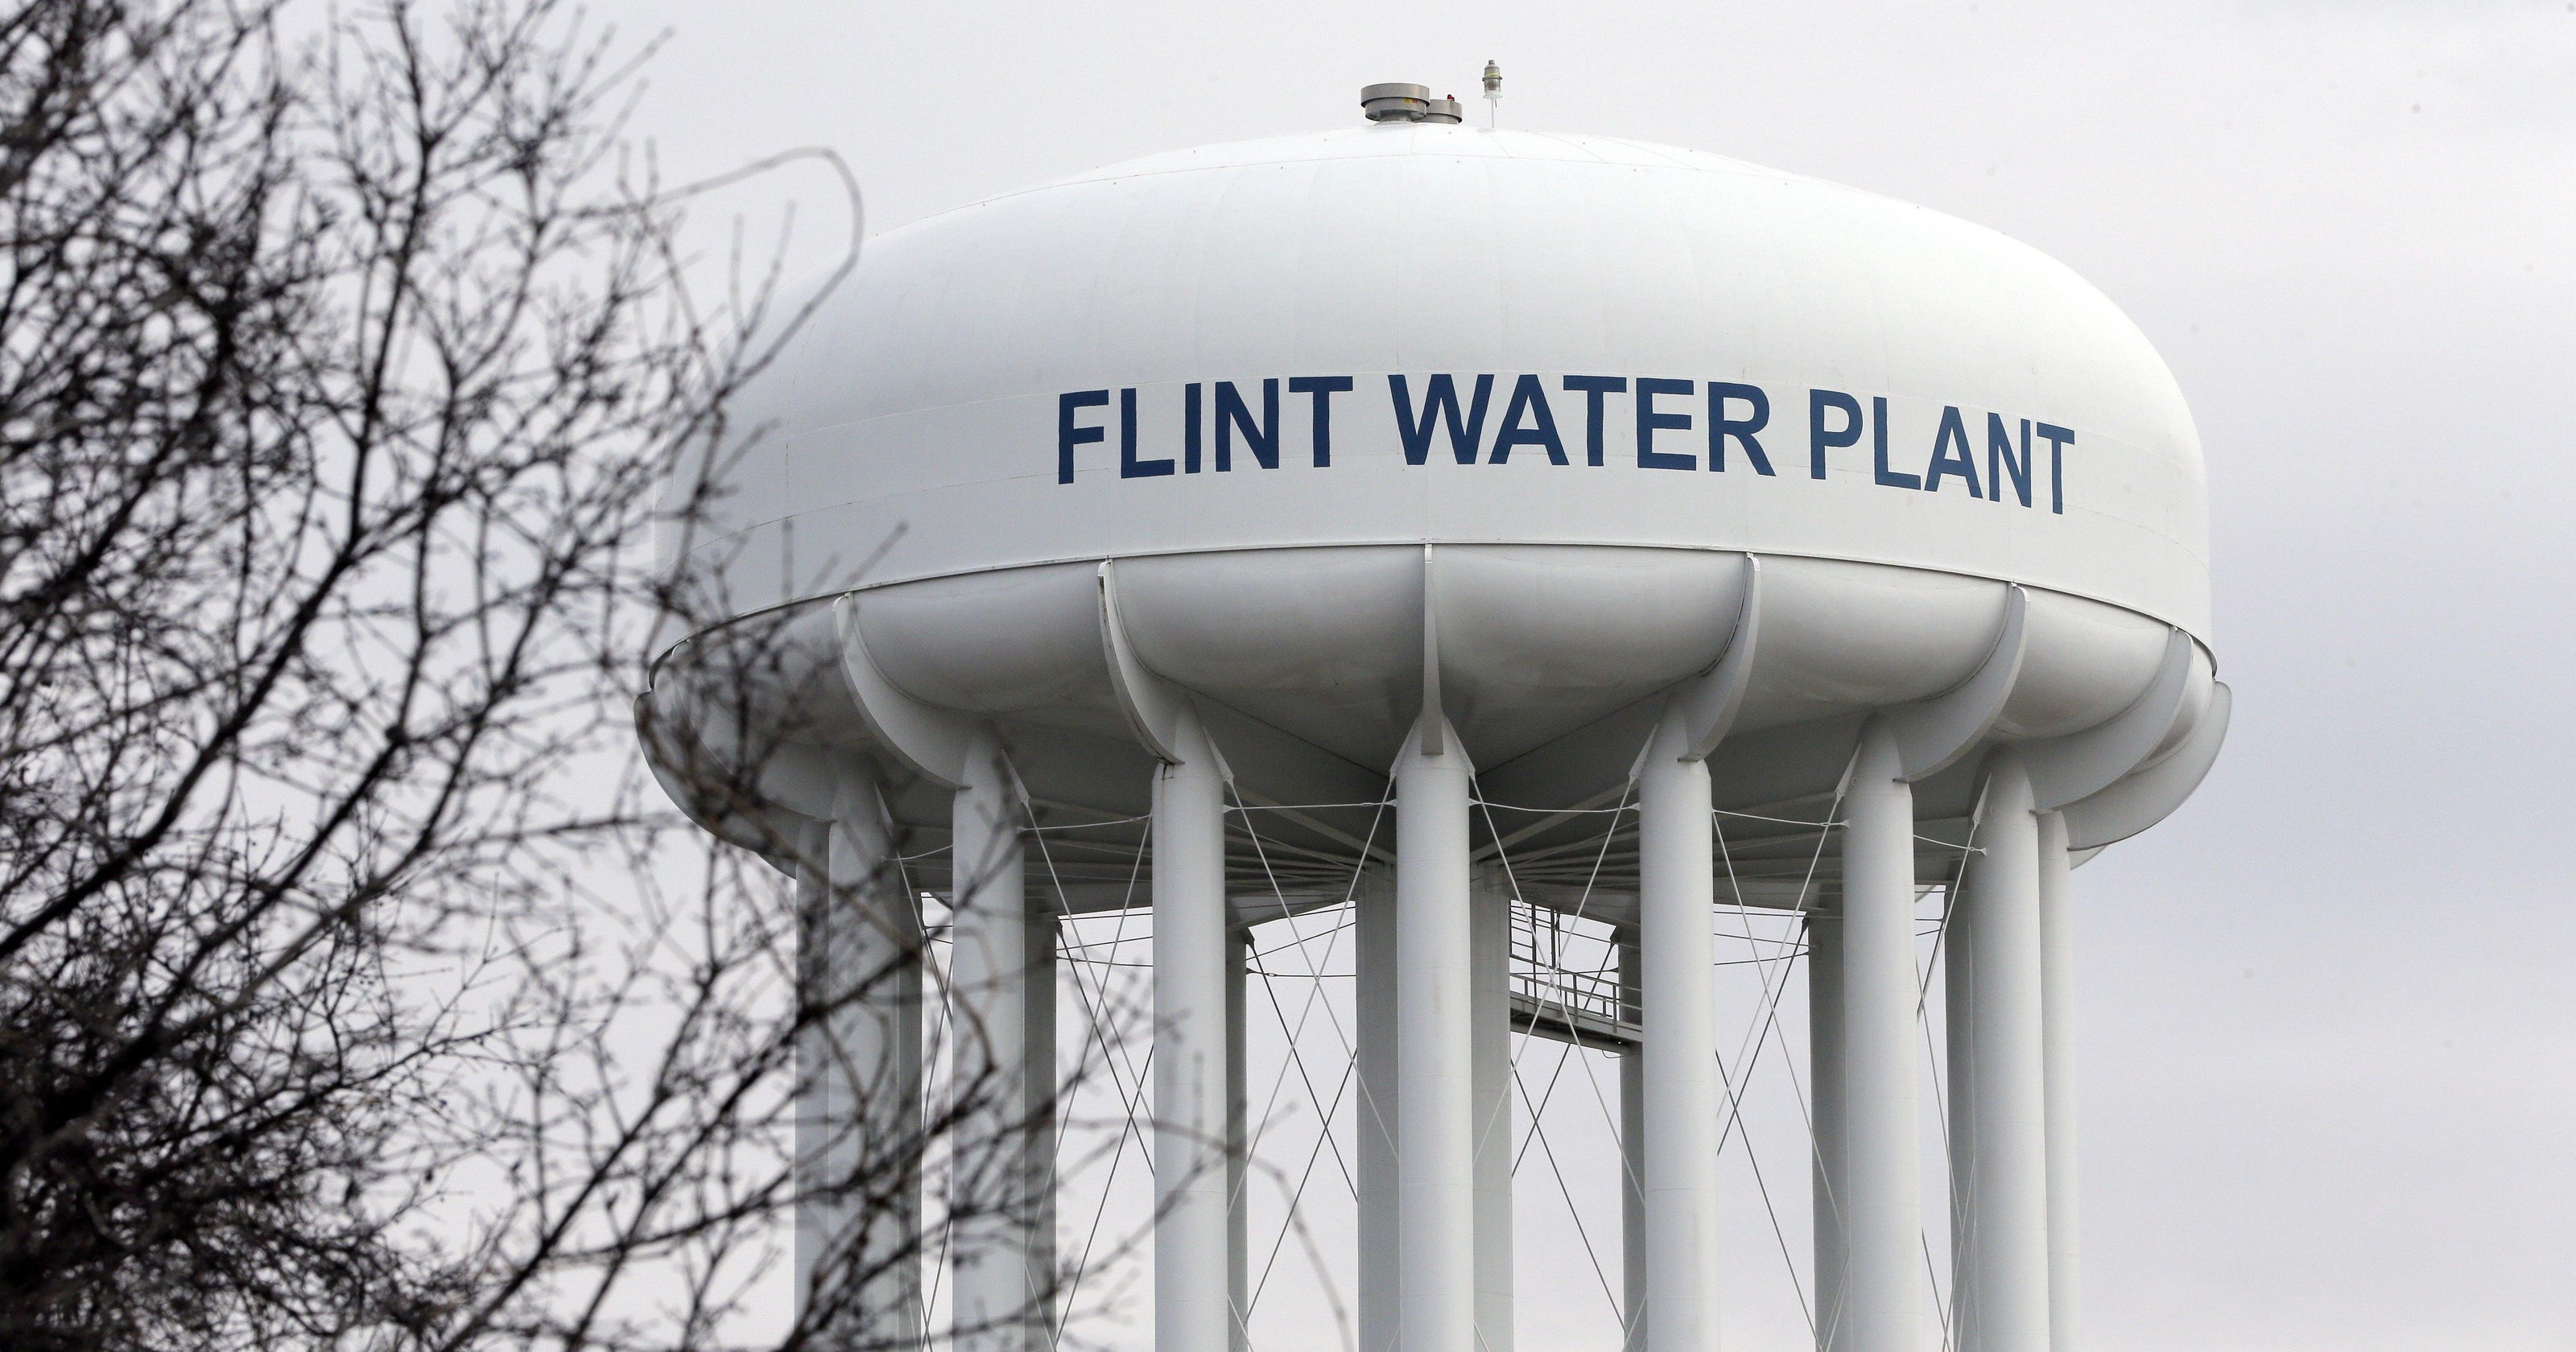 Opinion: Following Flint, increase drinking water transparency - The Detroit News